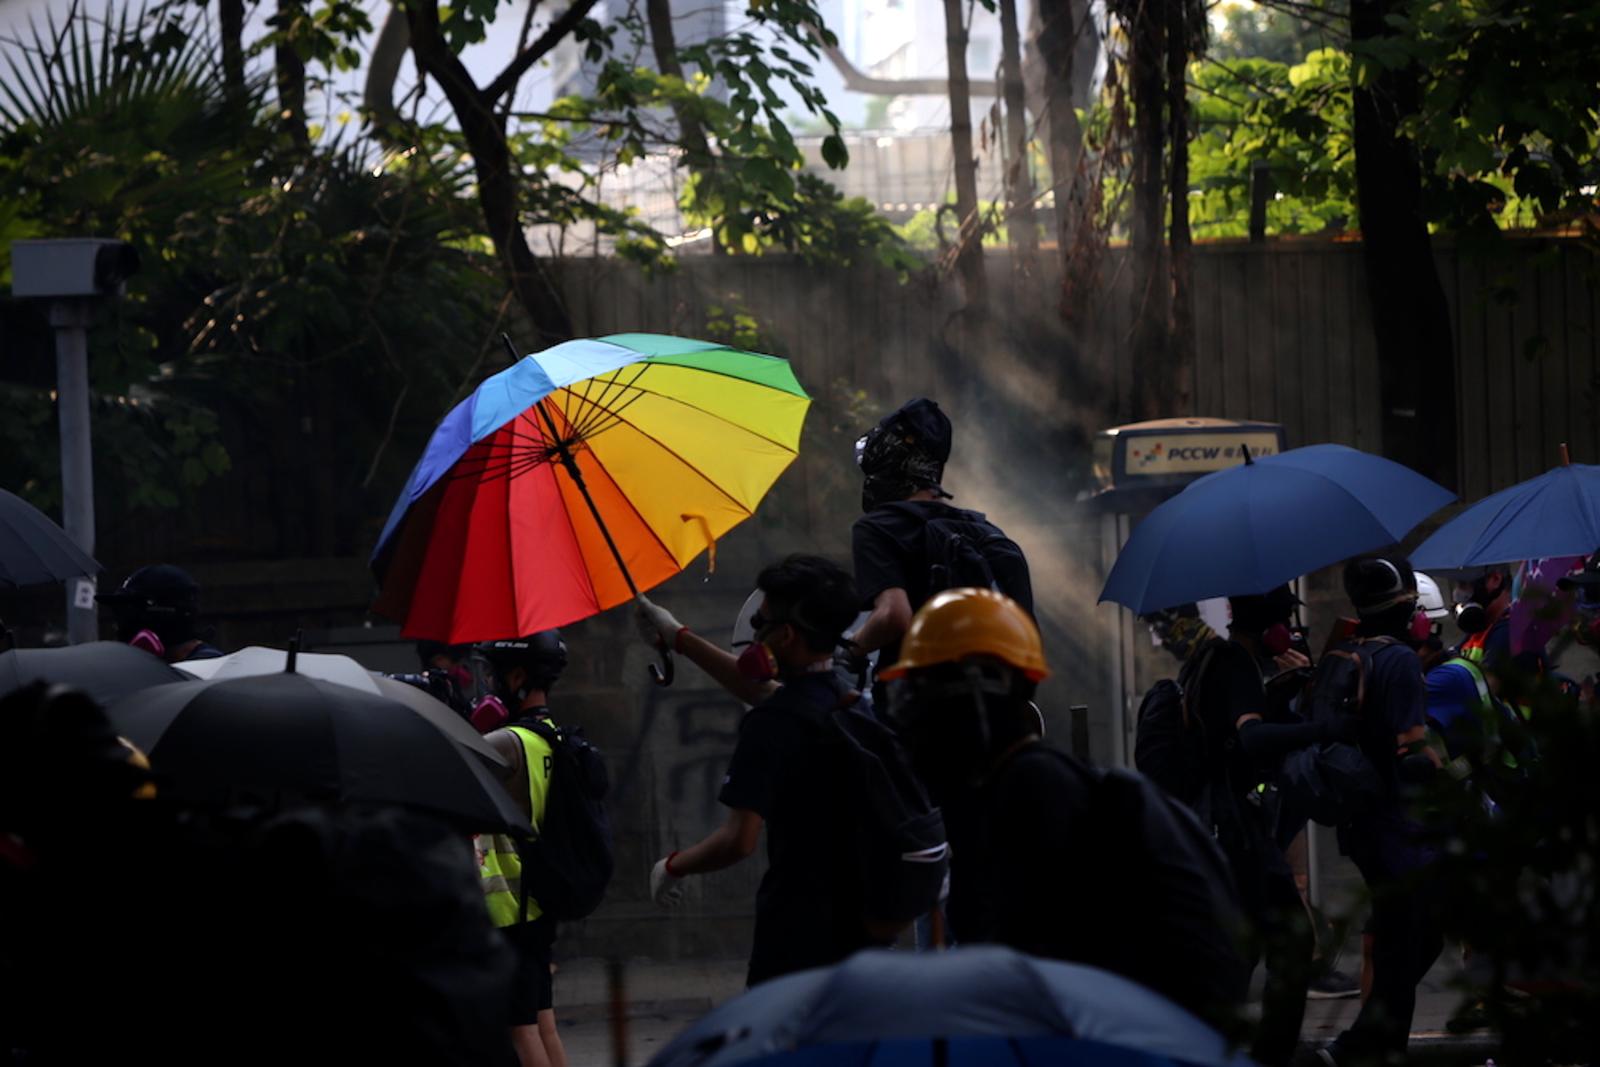  Tsim Sha Tsui, Hong Kong (October 20, 2019) - A black-clad protestor uses a bright umbrella as a shield against tear gas and surveillance as they pass by a police station. 